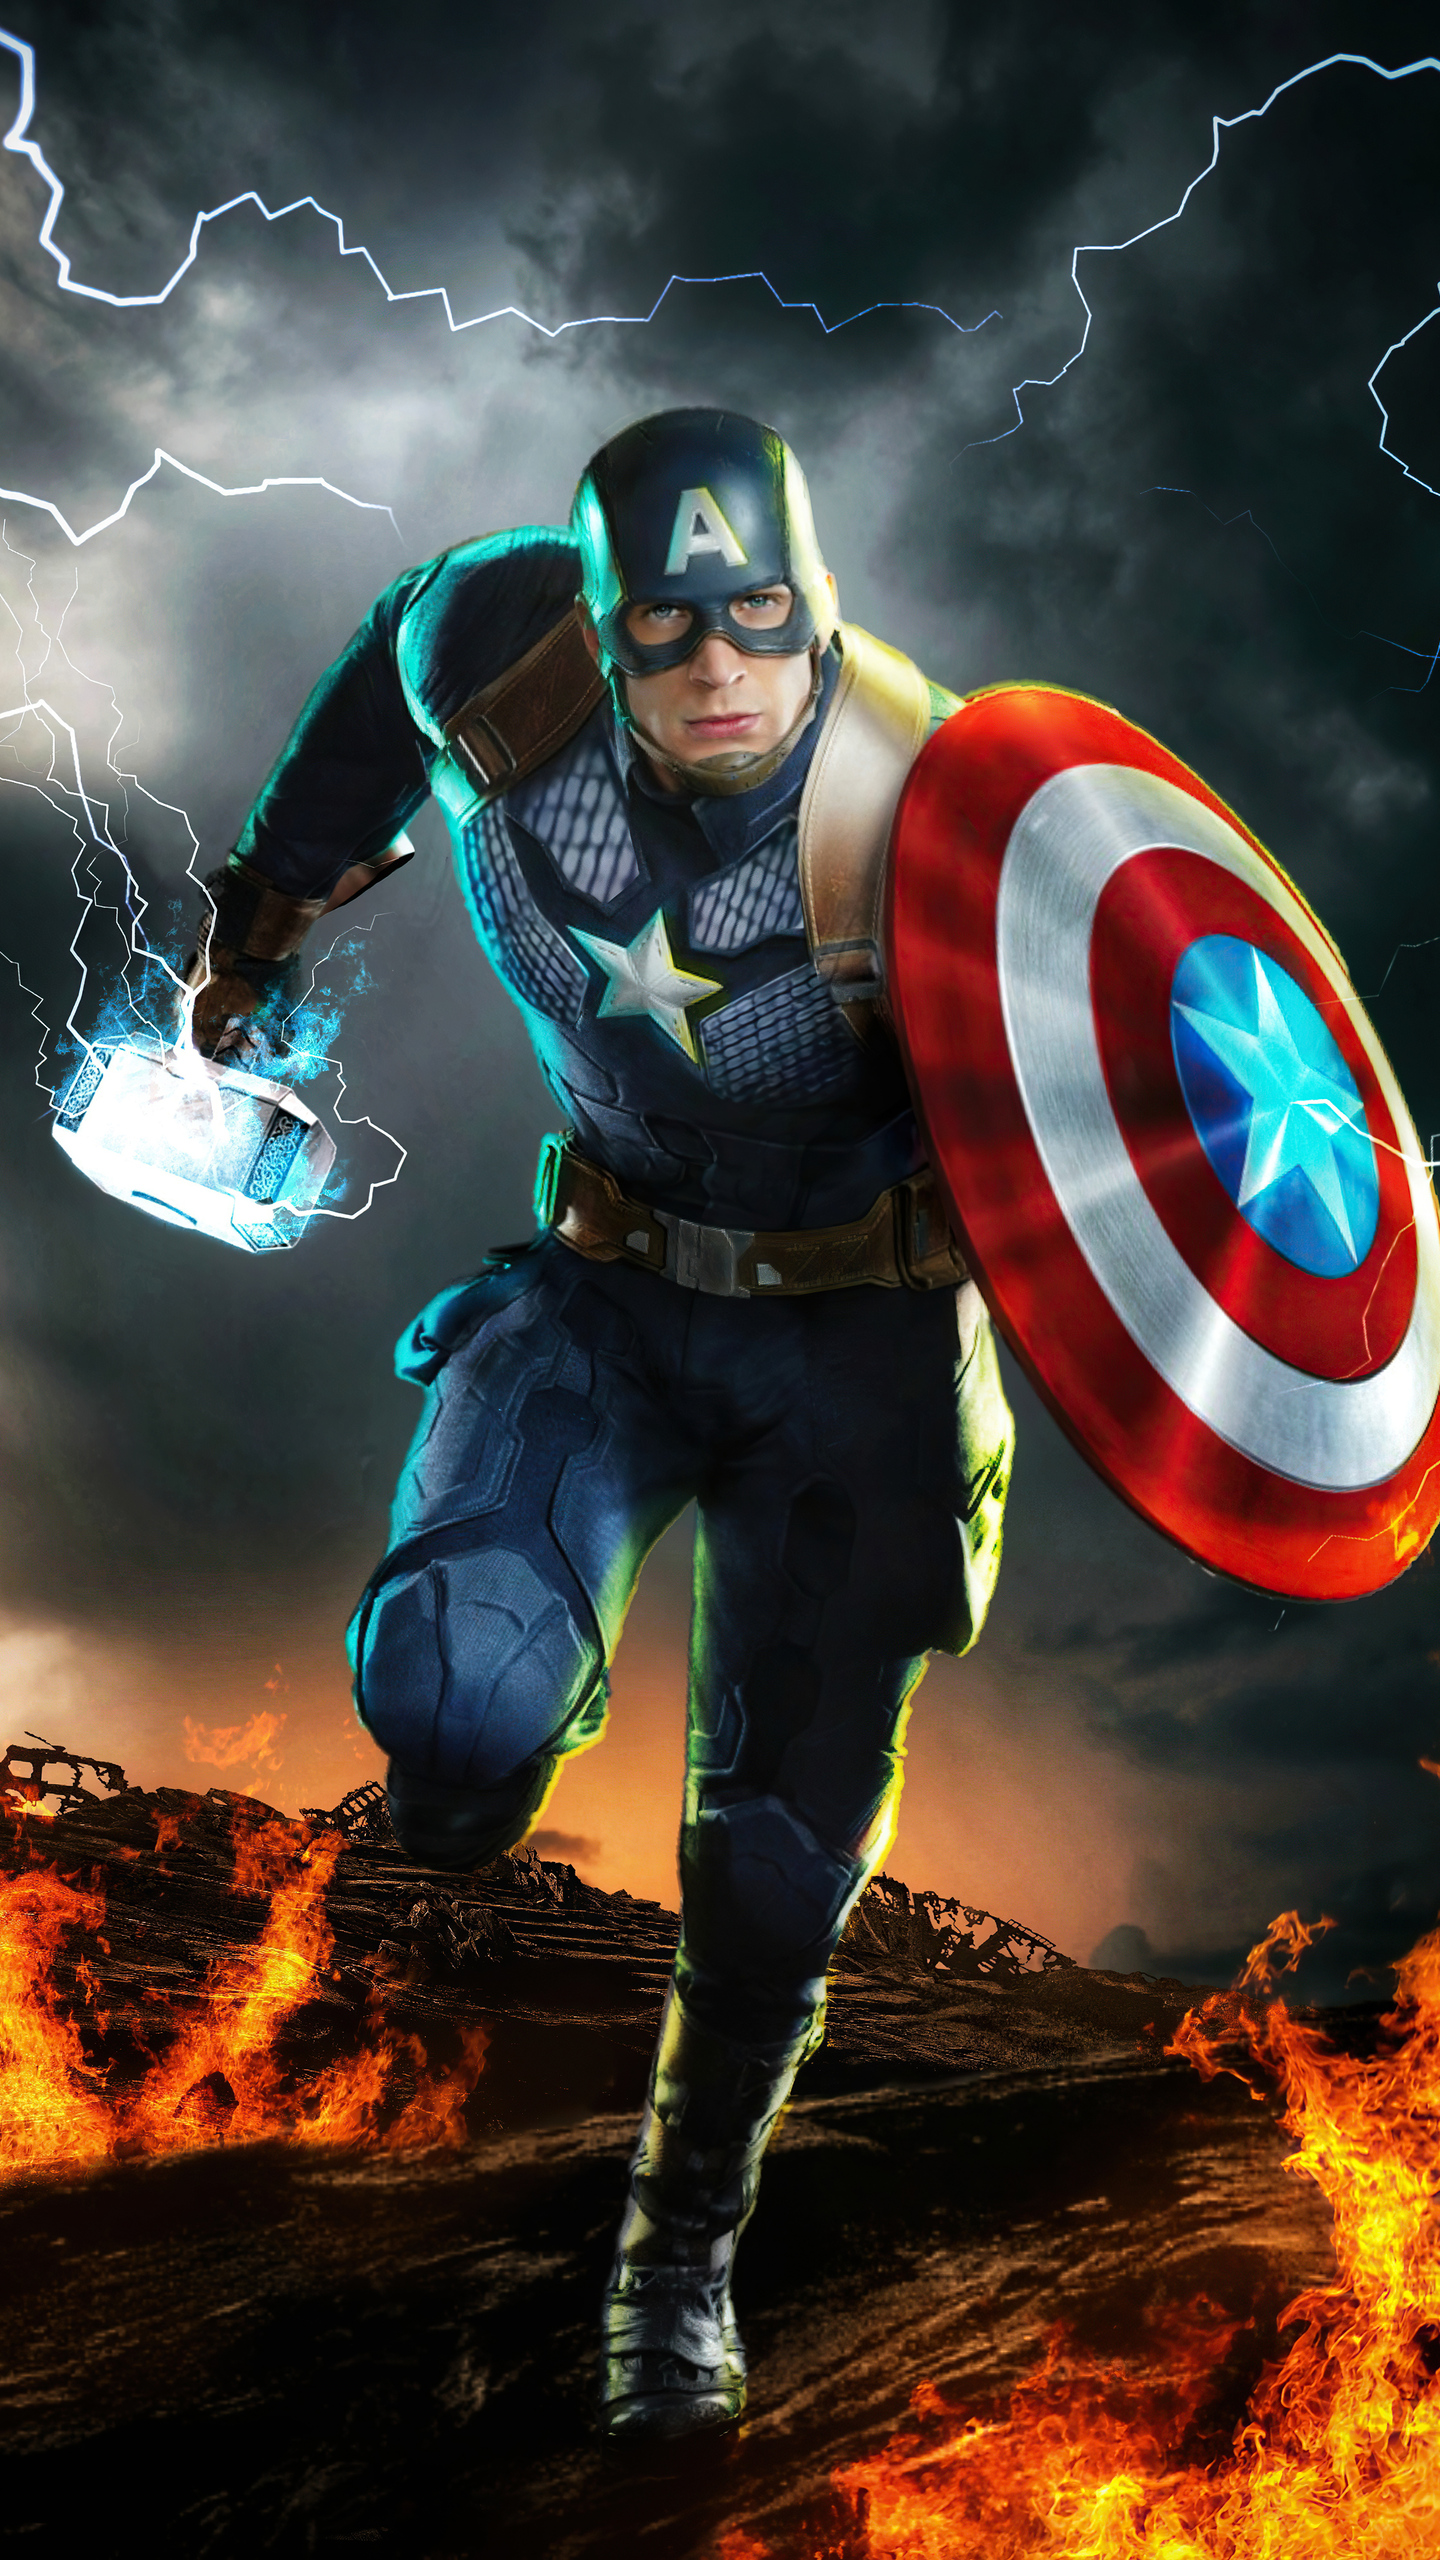 Marvel Captain America What If Wallpapers